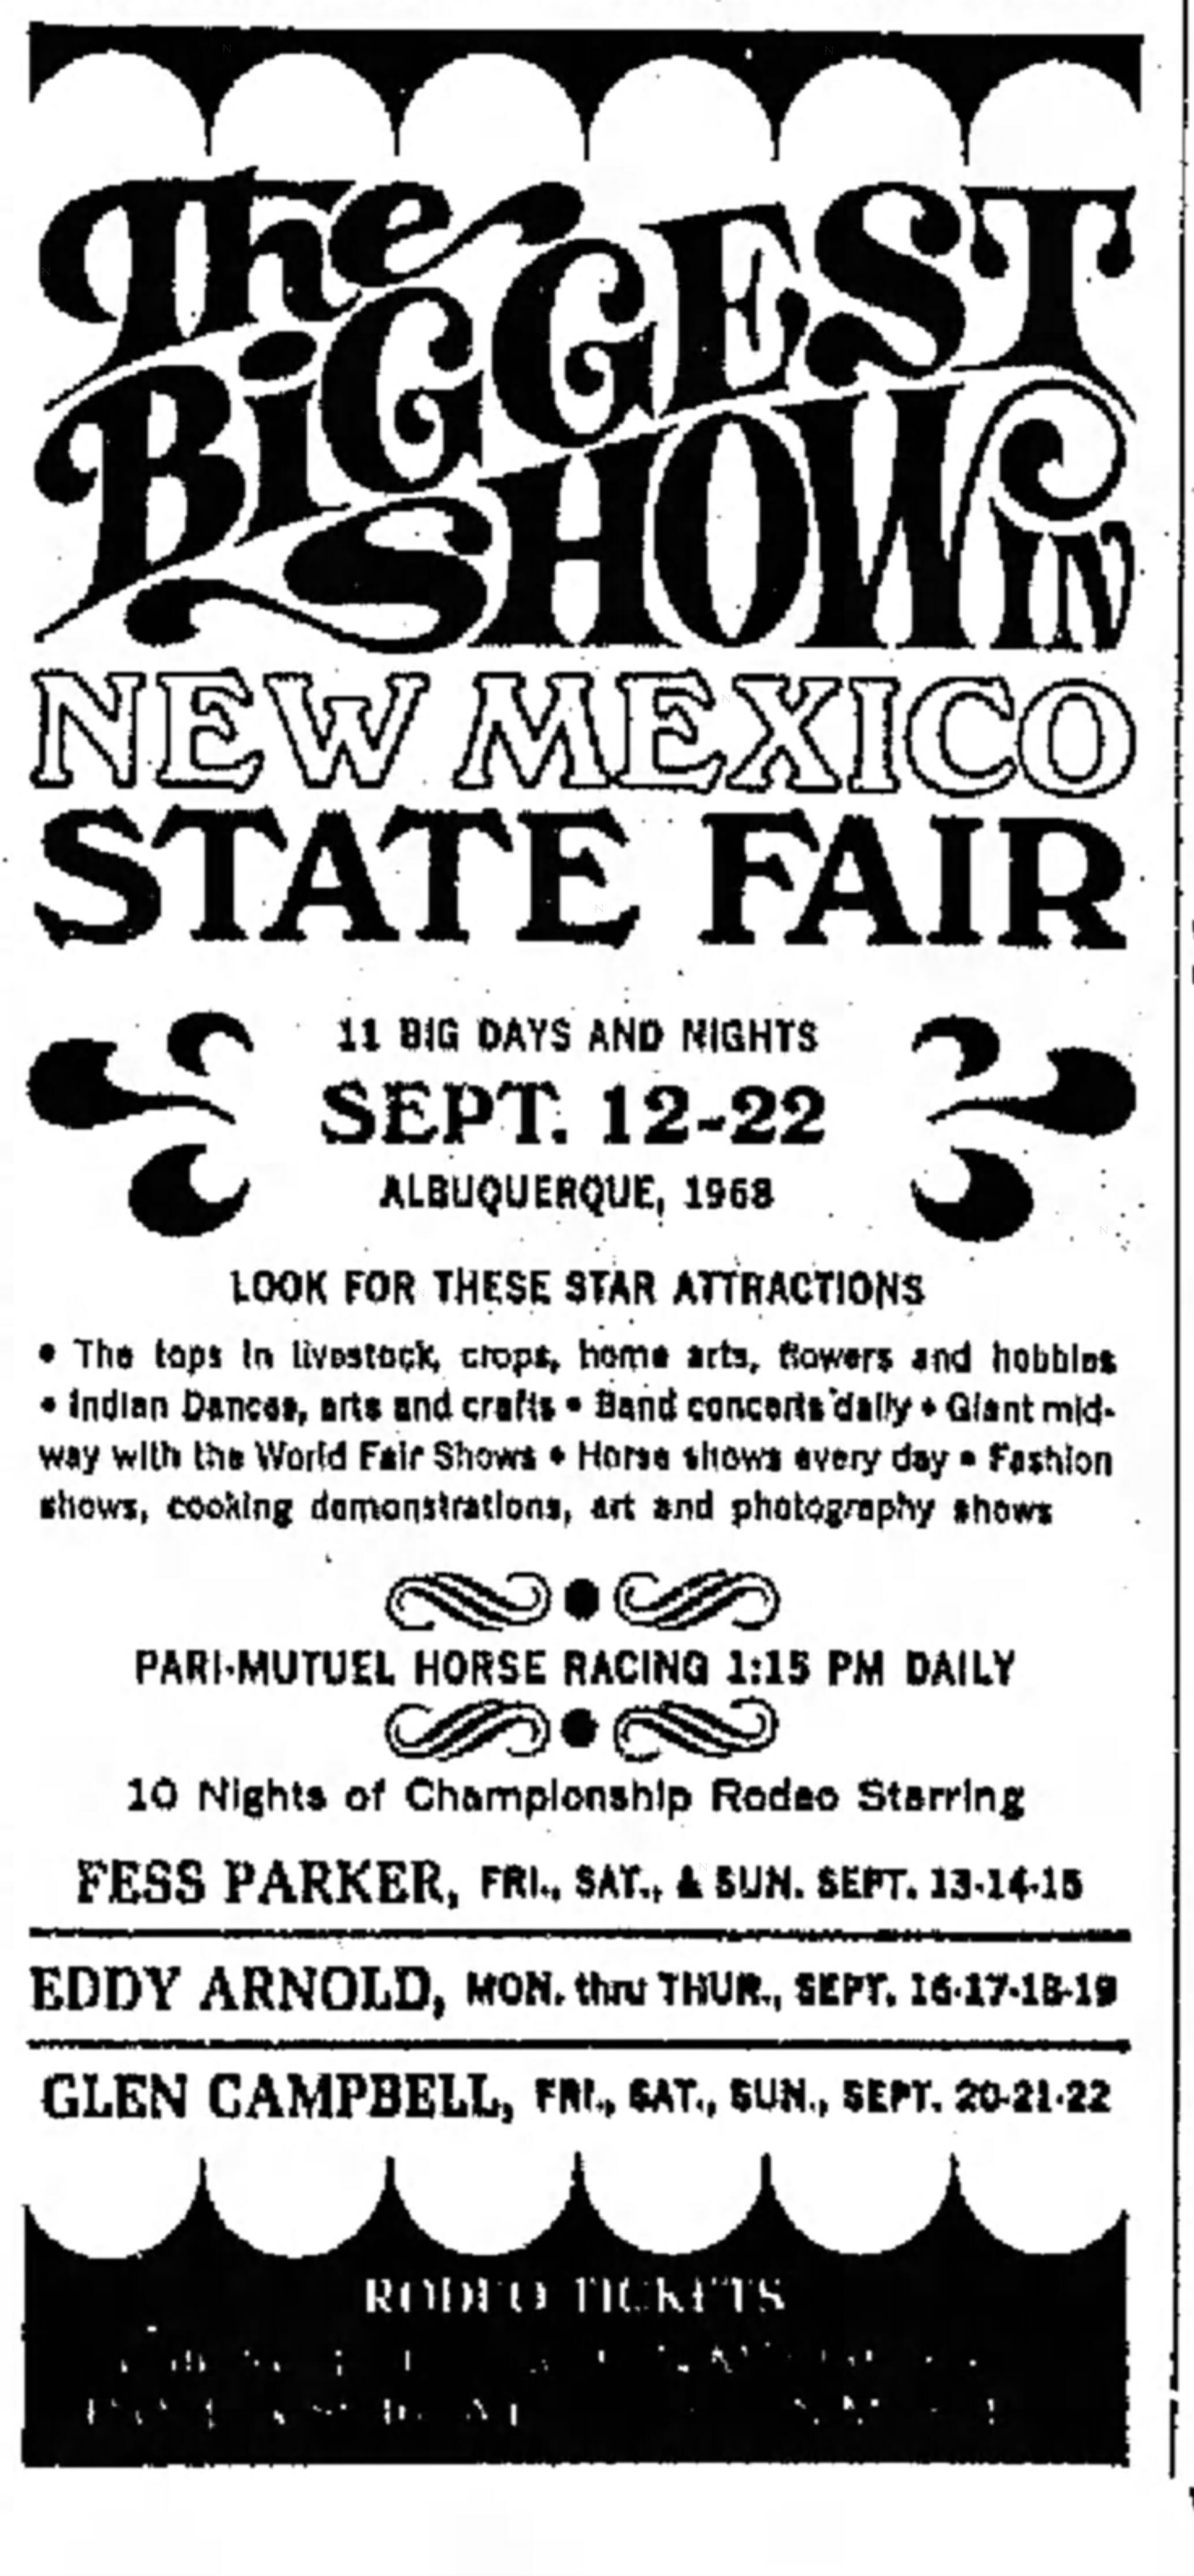 Glen Campbell Performs at 1968 New Mexico State Fair